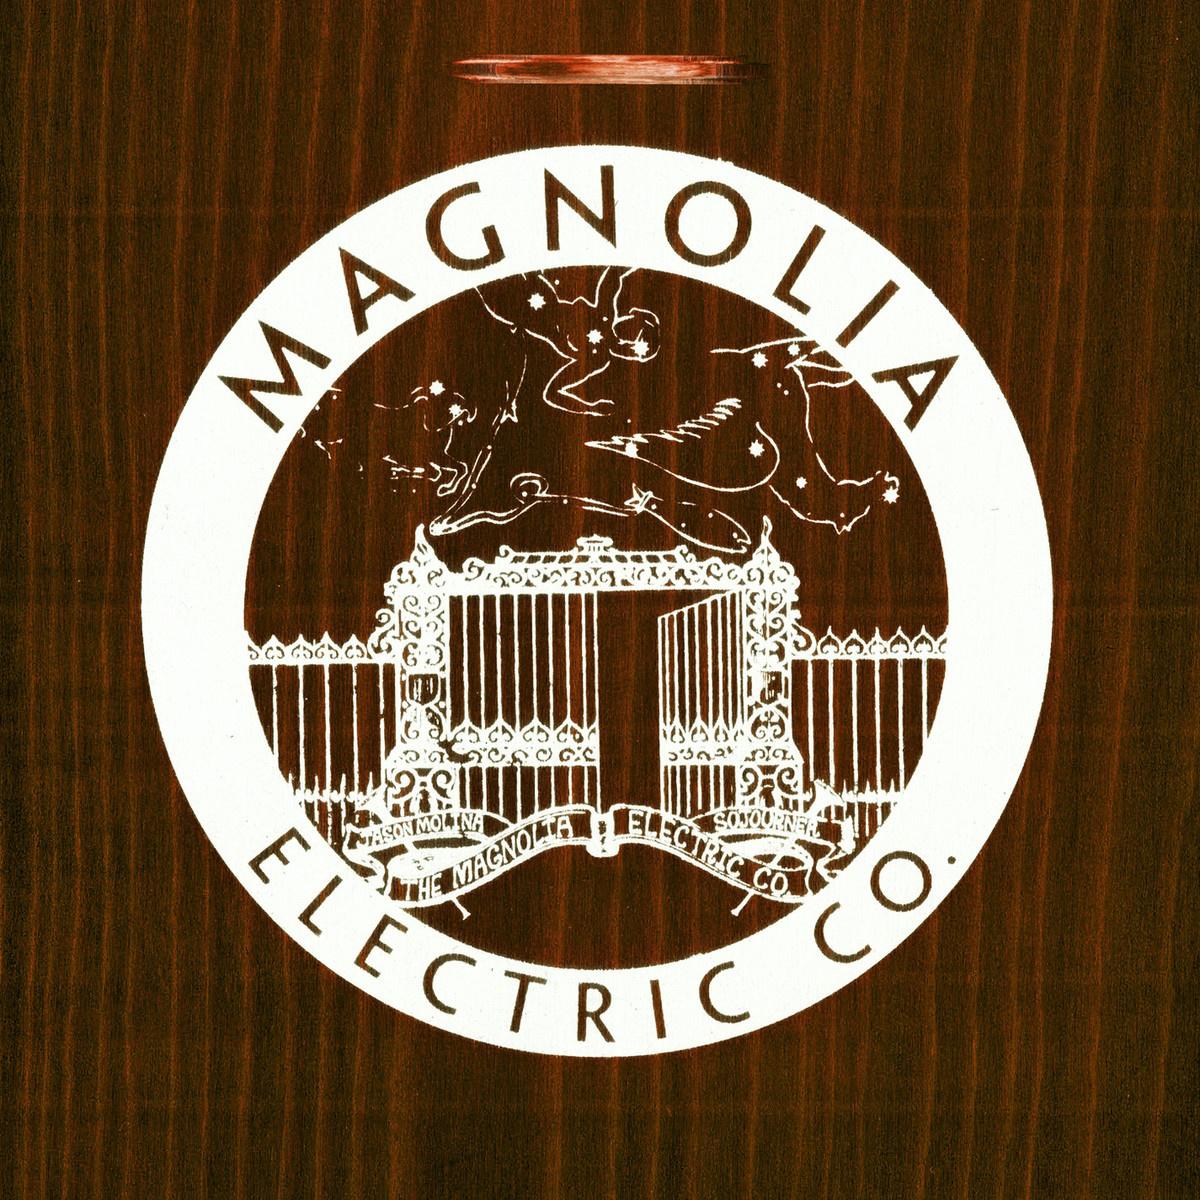 Magnolia Electric Co. - Don't This Look Like The Dark (from Nashville Moon)